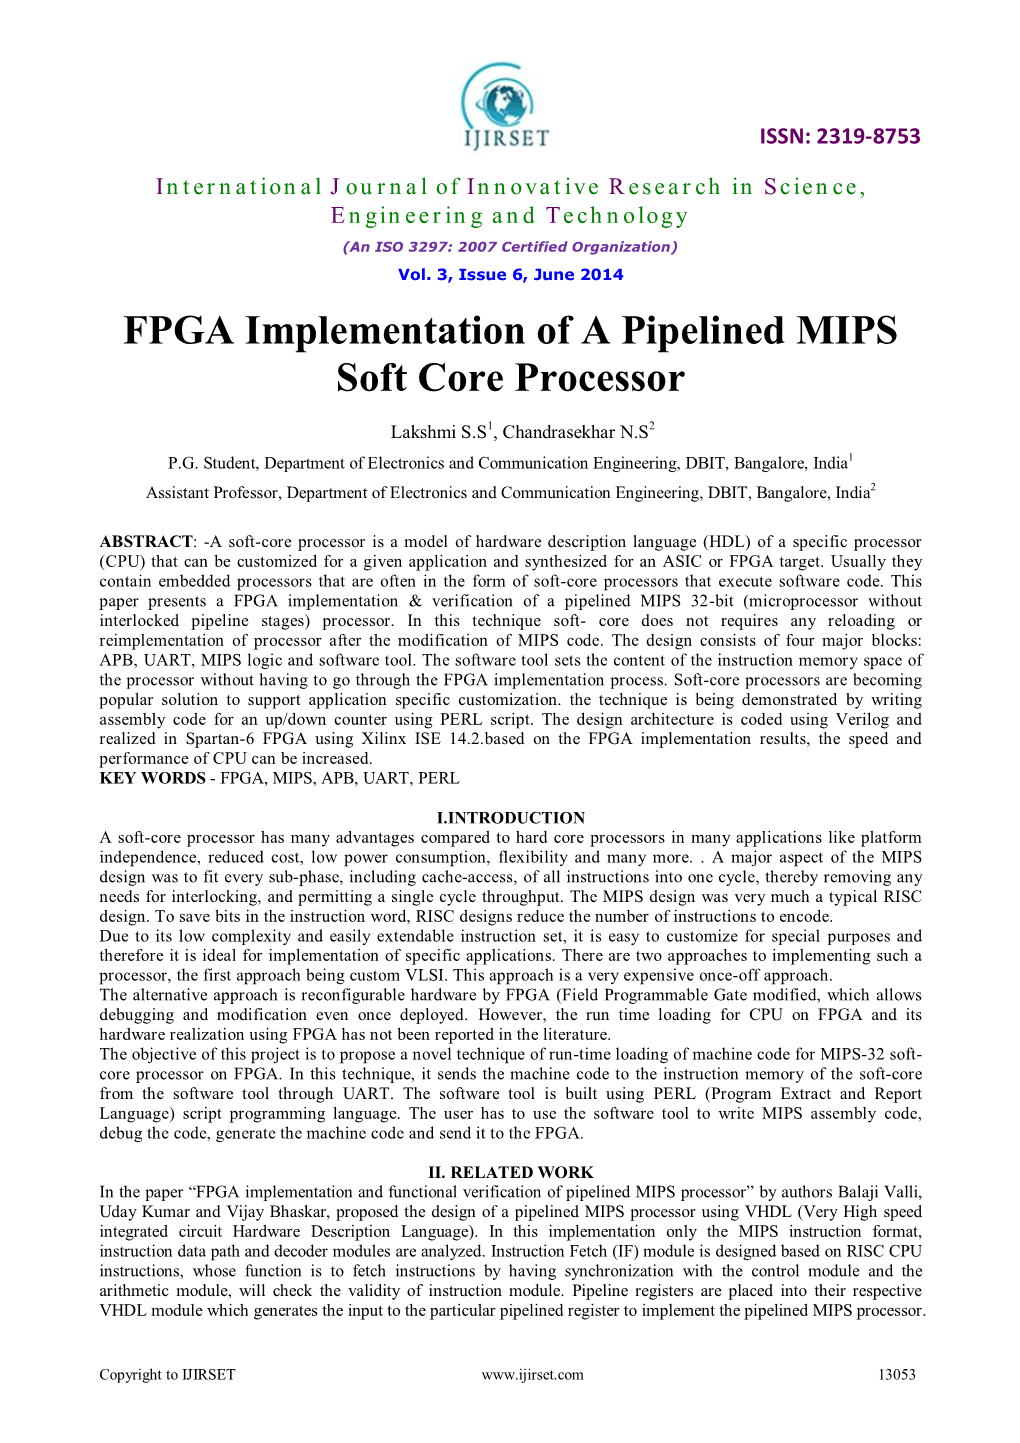 FPGA Implementation of a Pipelined MIPS Soft Core Processor